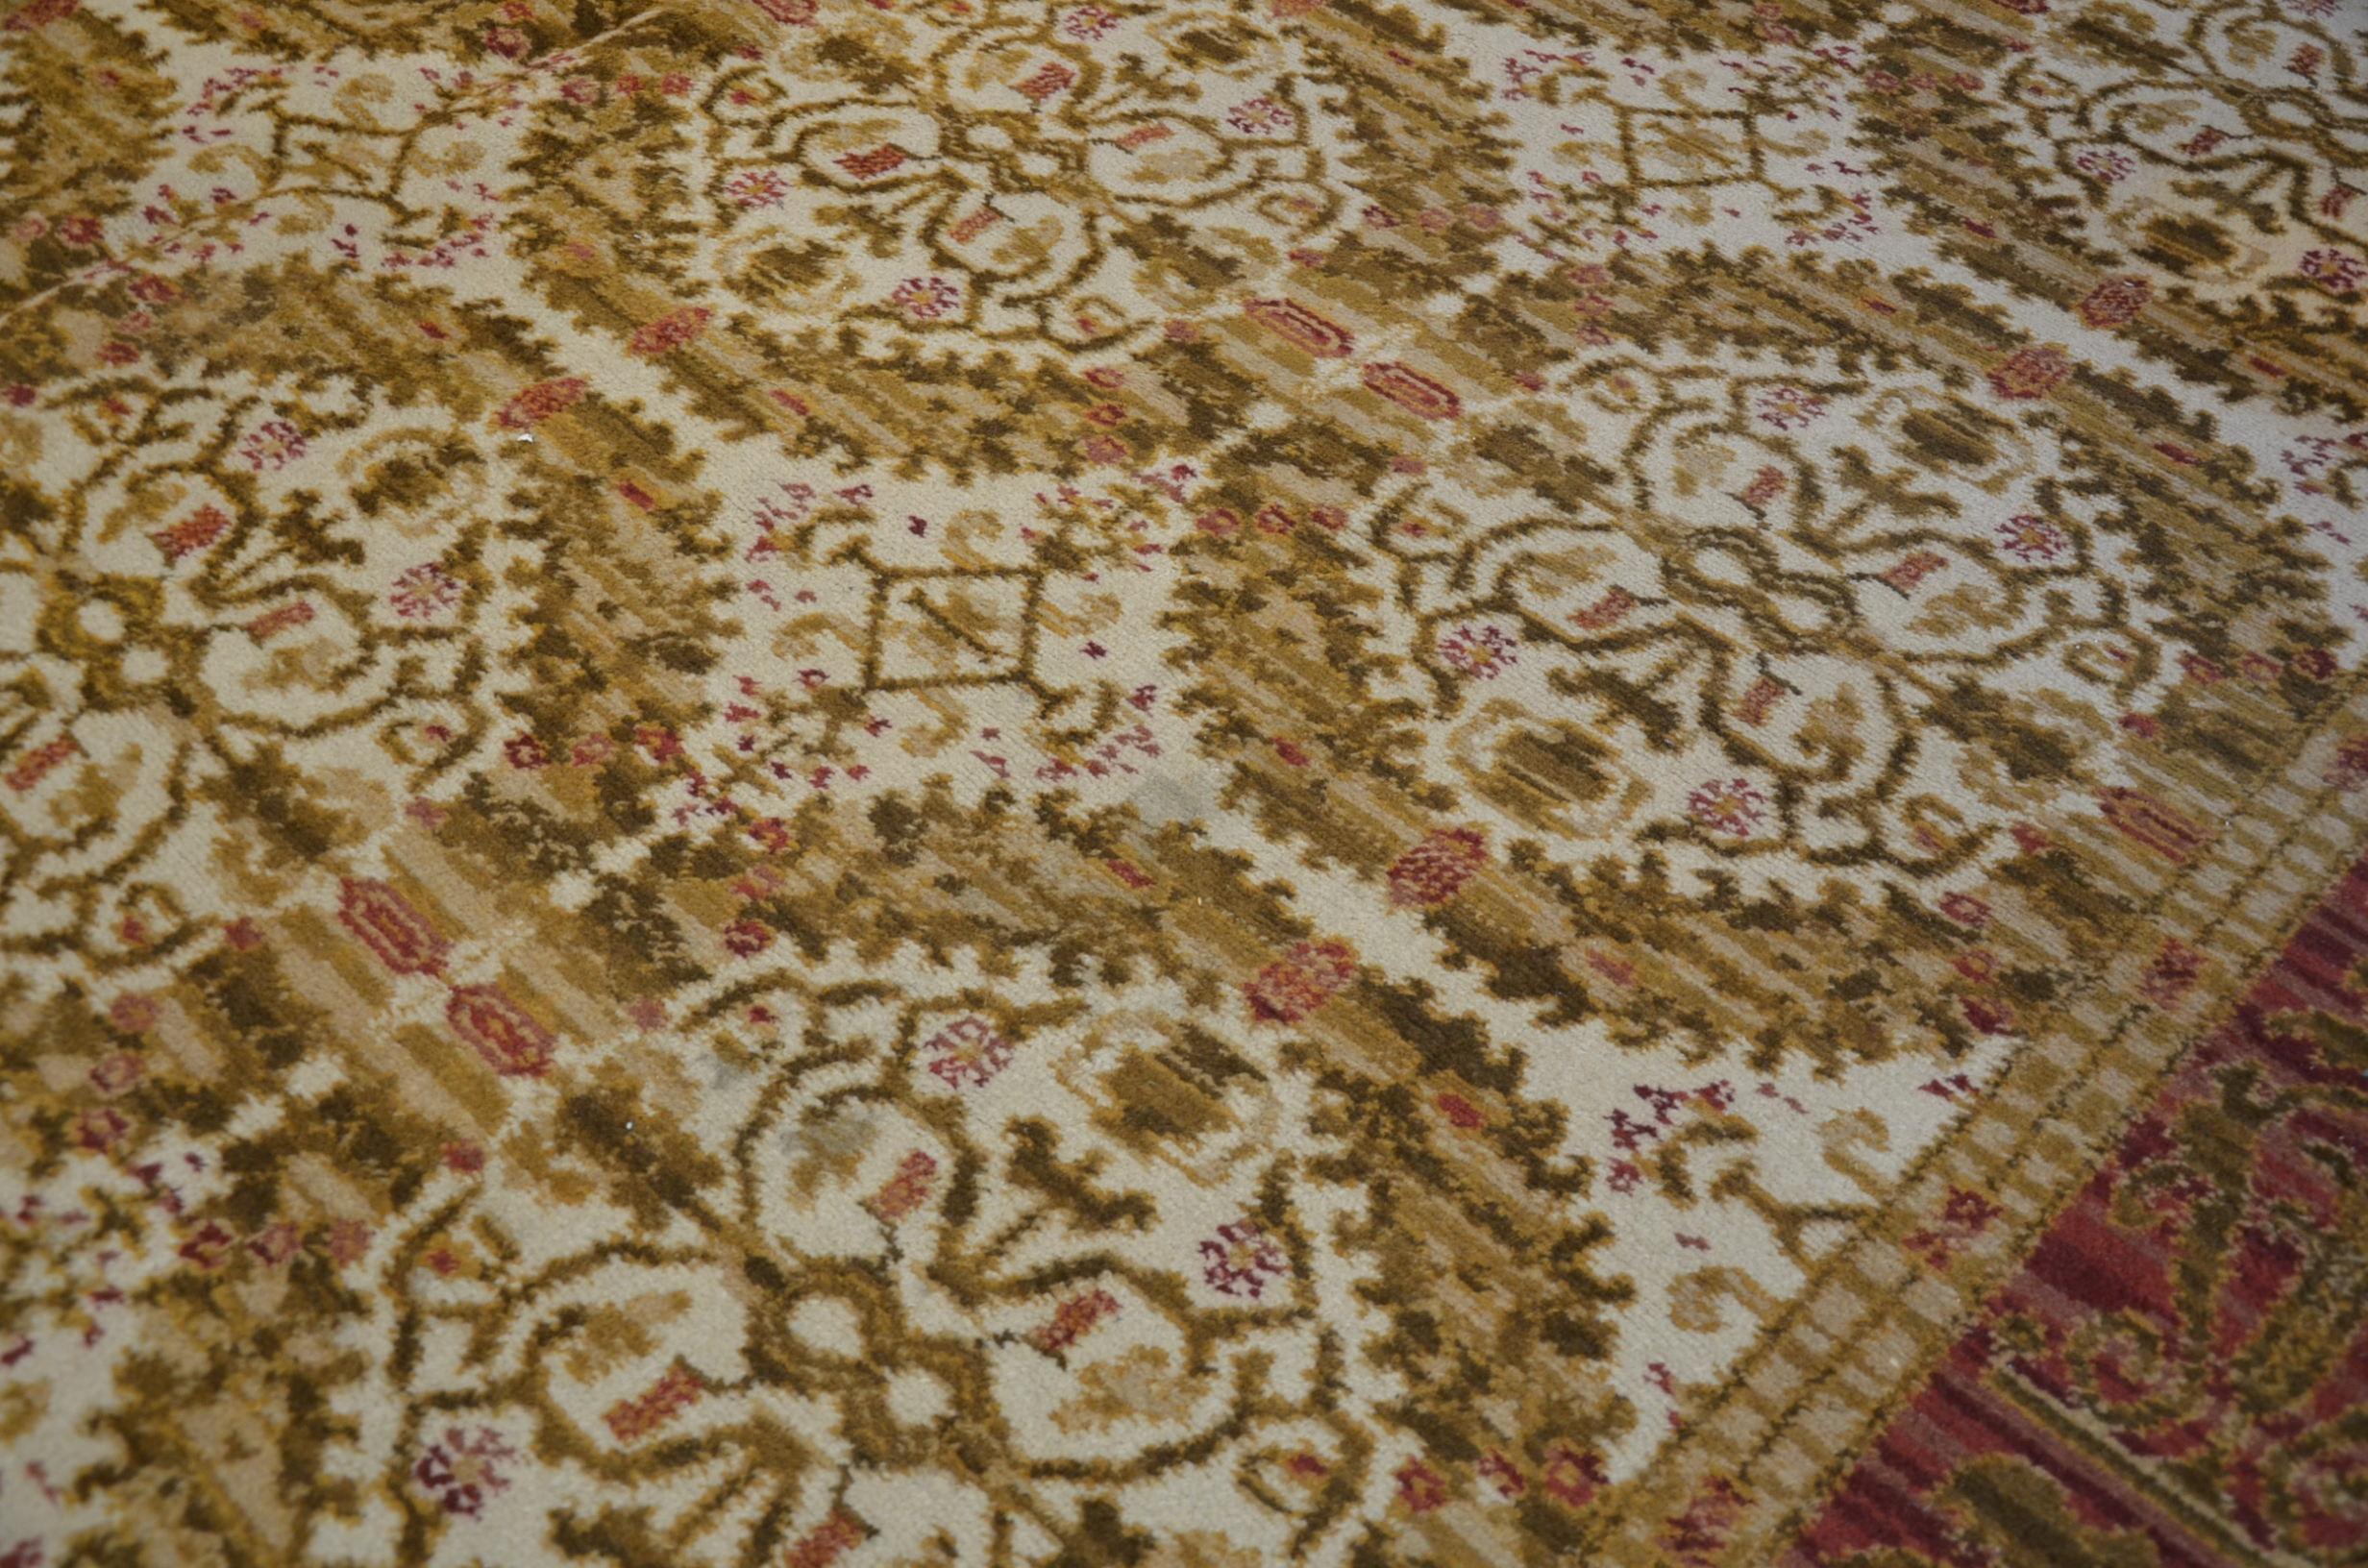 Spanish knot rug made around 1950. Tipical design Fundation rugs.
Handcrafted in wool in green and pink tones on a beige background.
- It stands out for its magnificent state of conservation without restorations or deterioration.
- It will be ideal